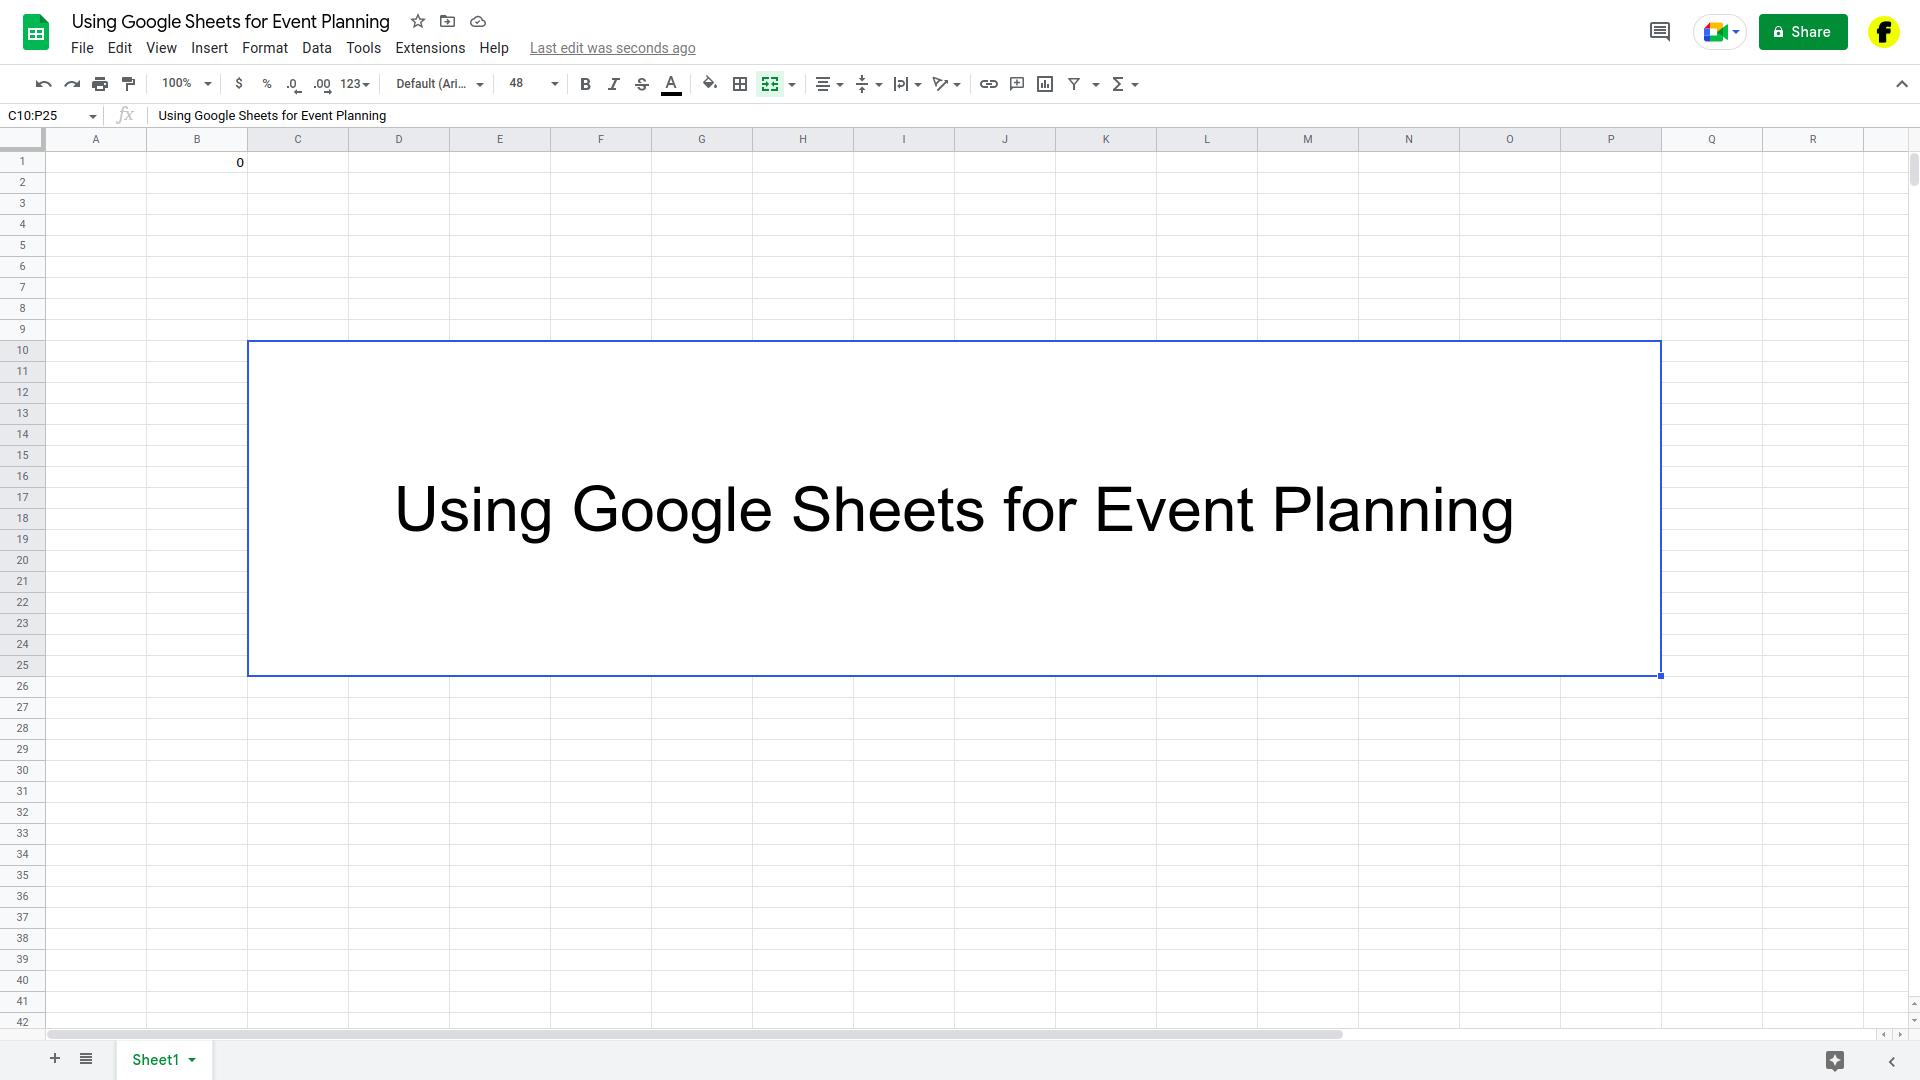 Using Google Sheets for Event Planning